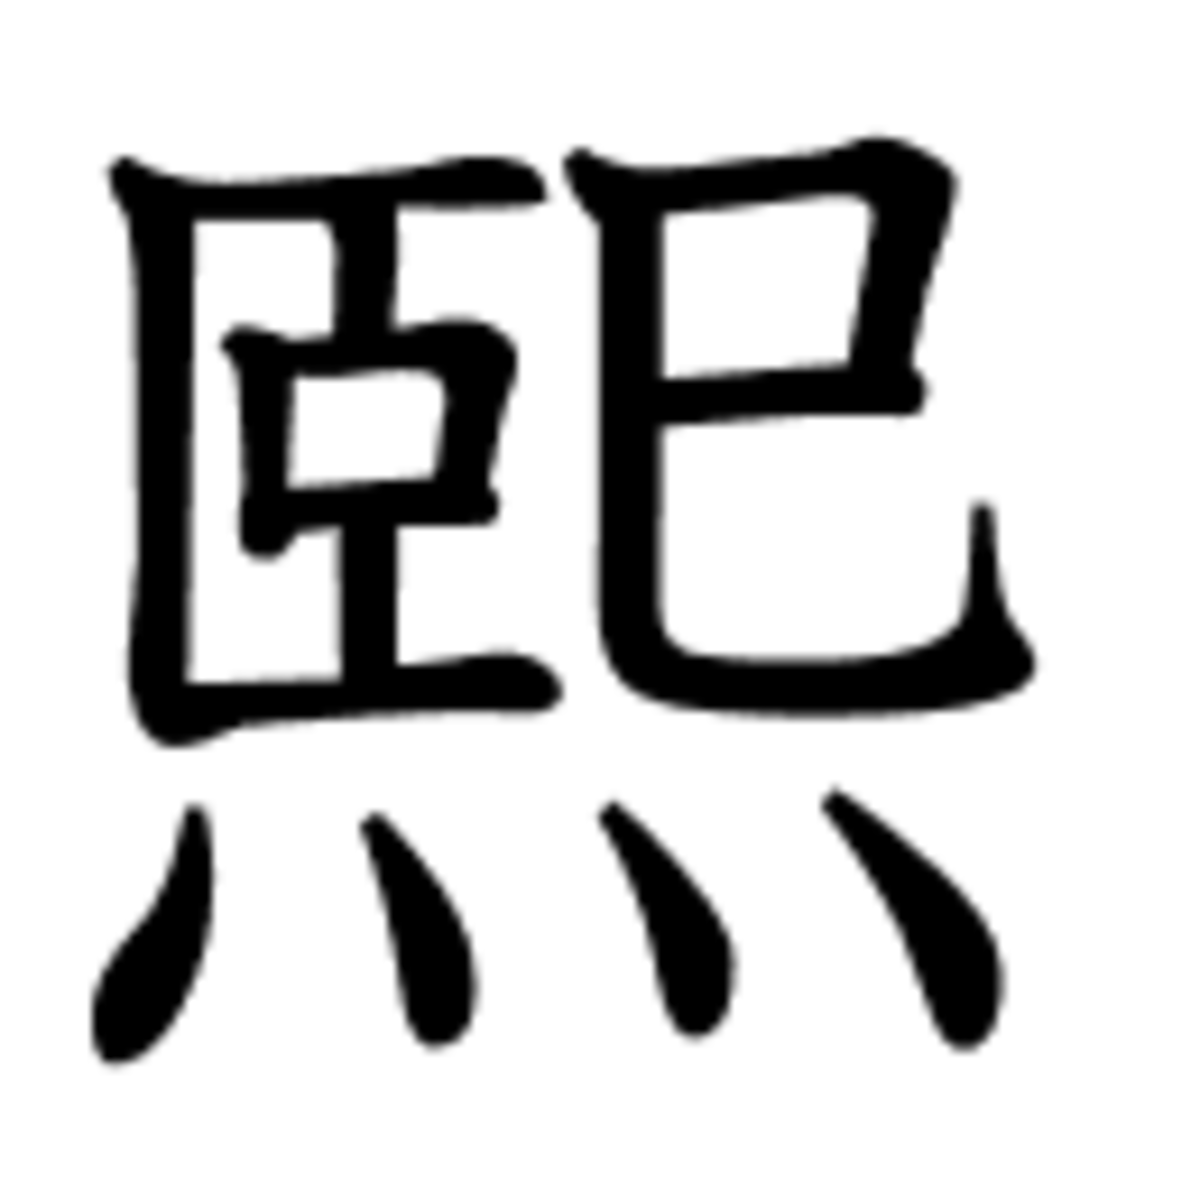 NO FEAR  The same symbol is used in Chinese and Korean.